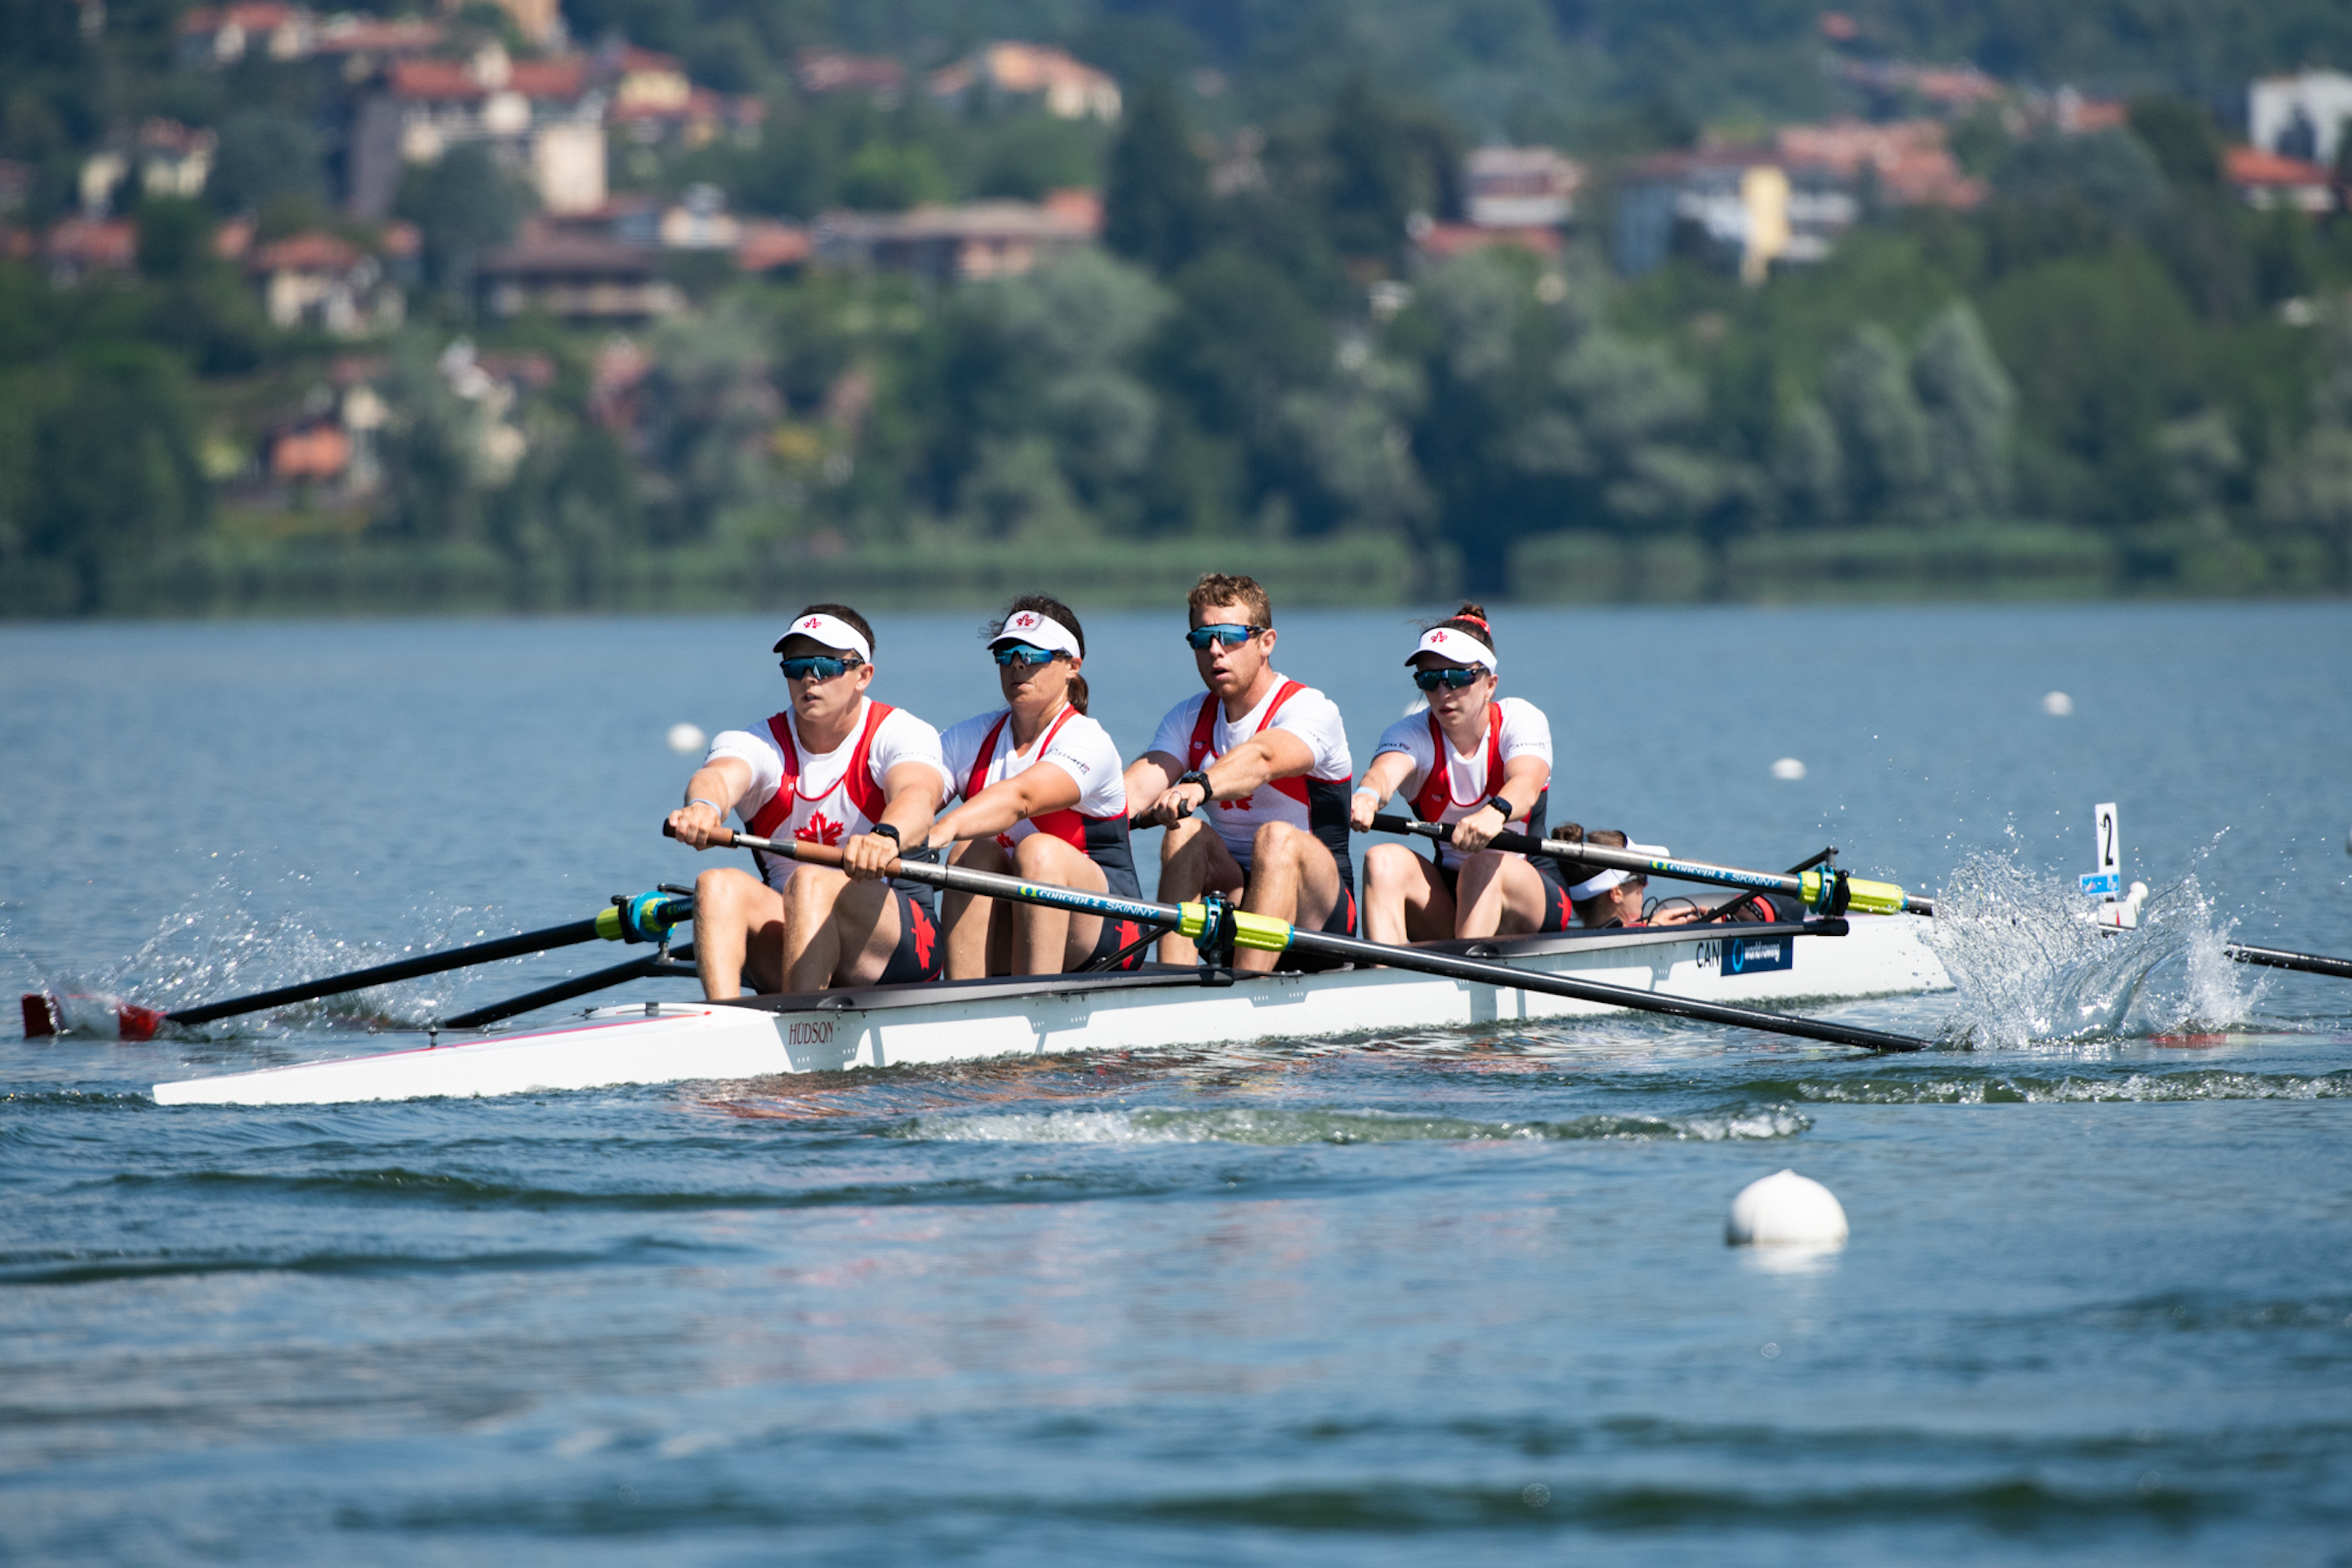 Canada off to strong start at Final Paralympic Qualification Regatta